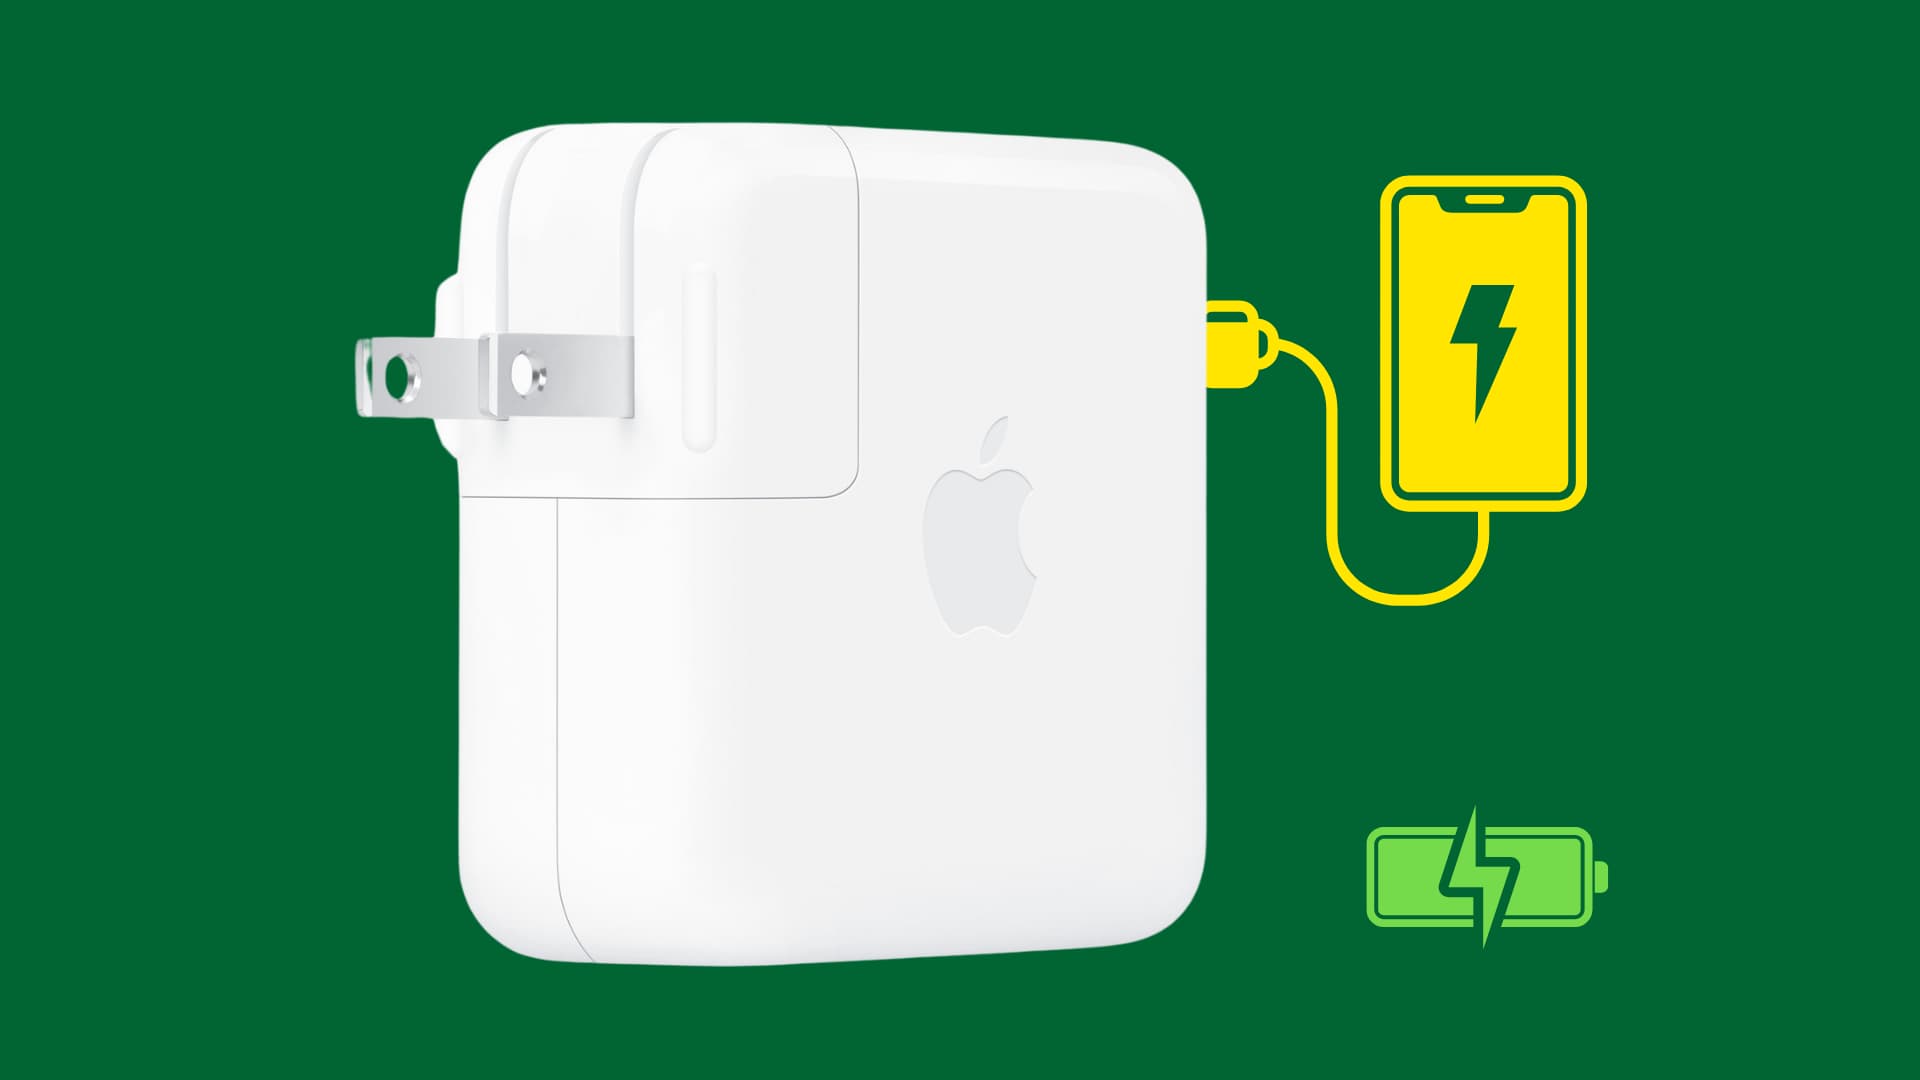 Illustration showing a big Apple power adapter with an iPhone charging icon to represent fast charging